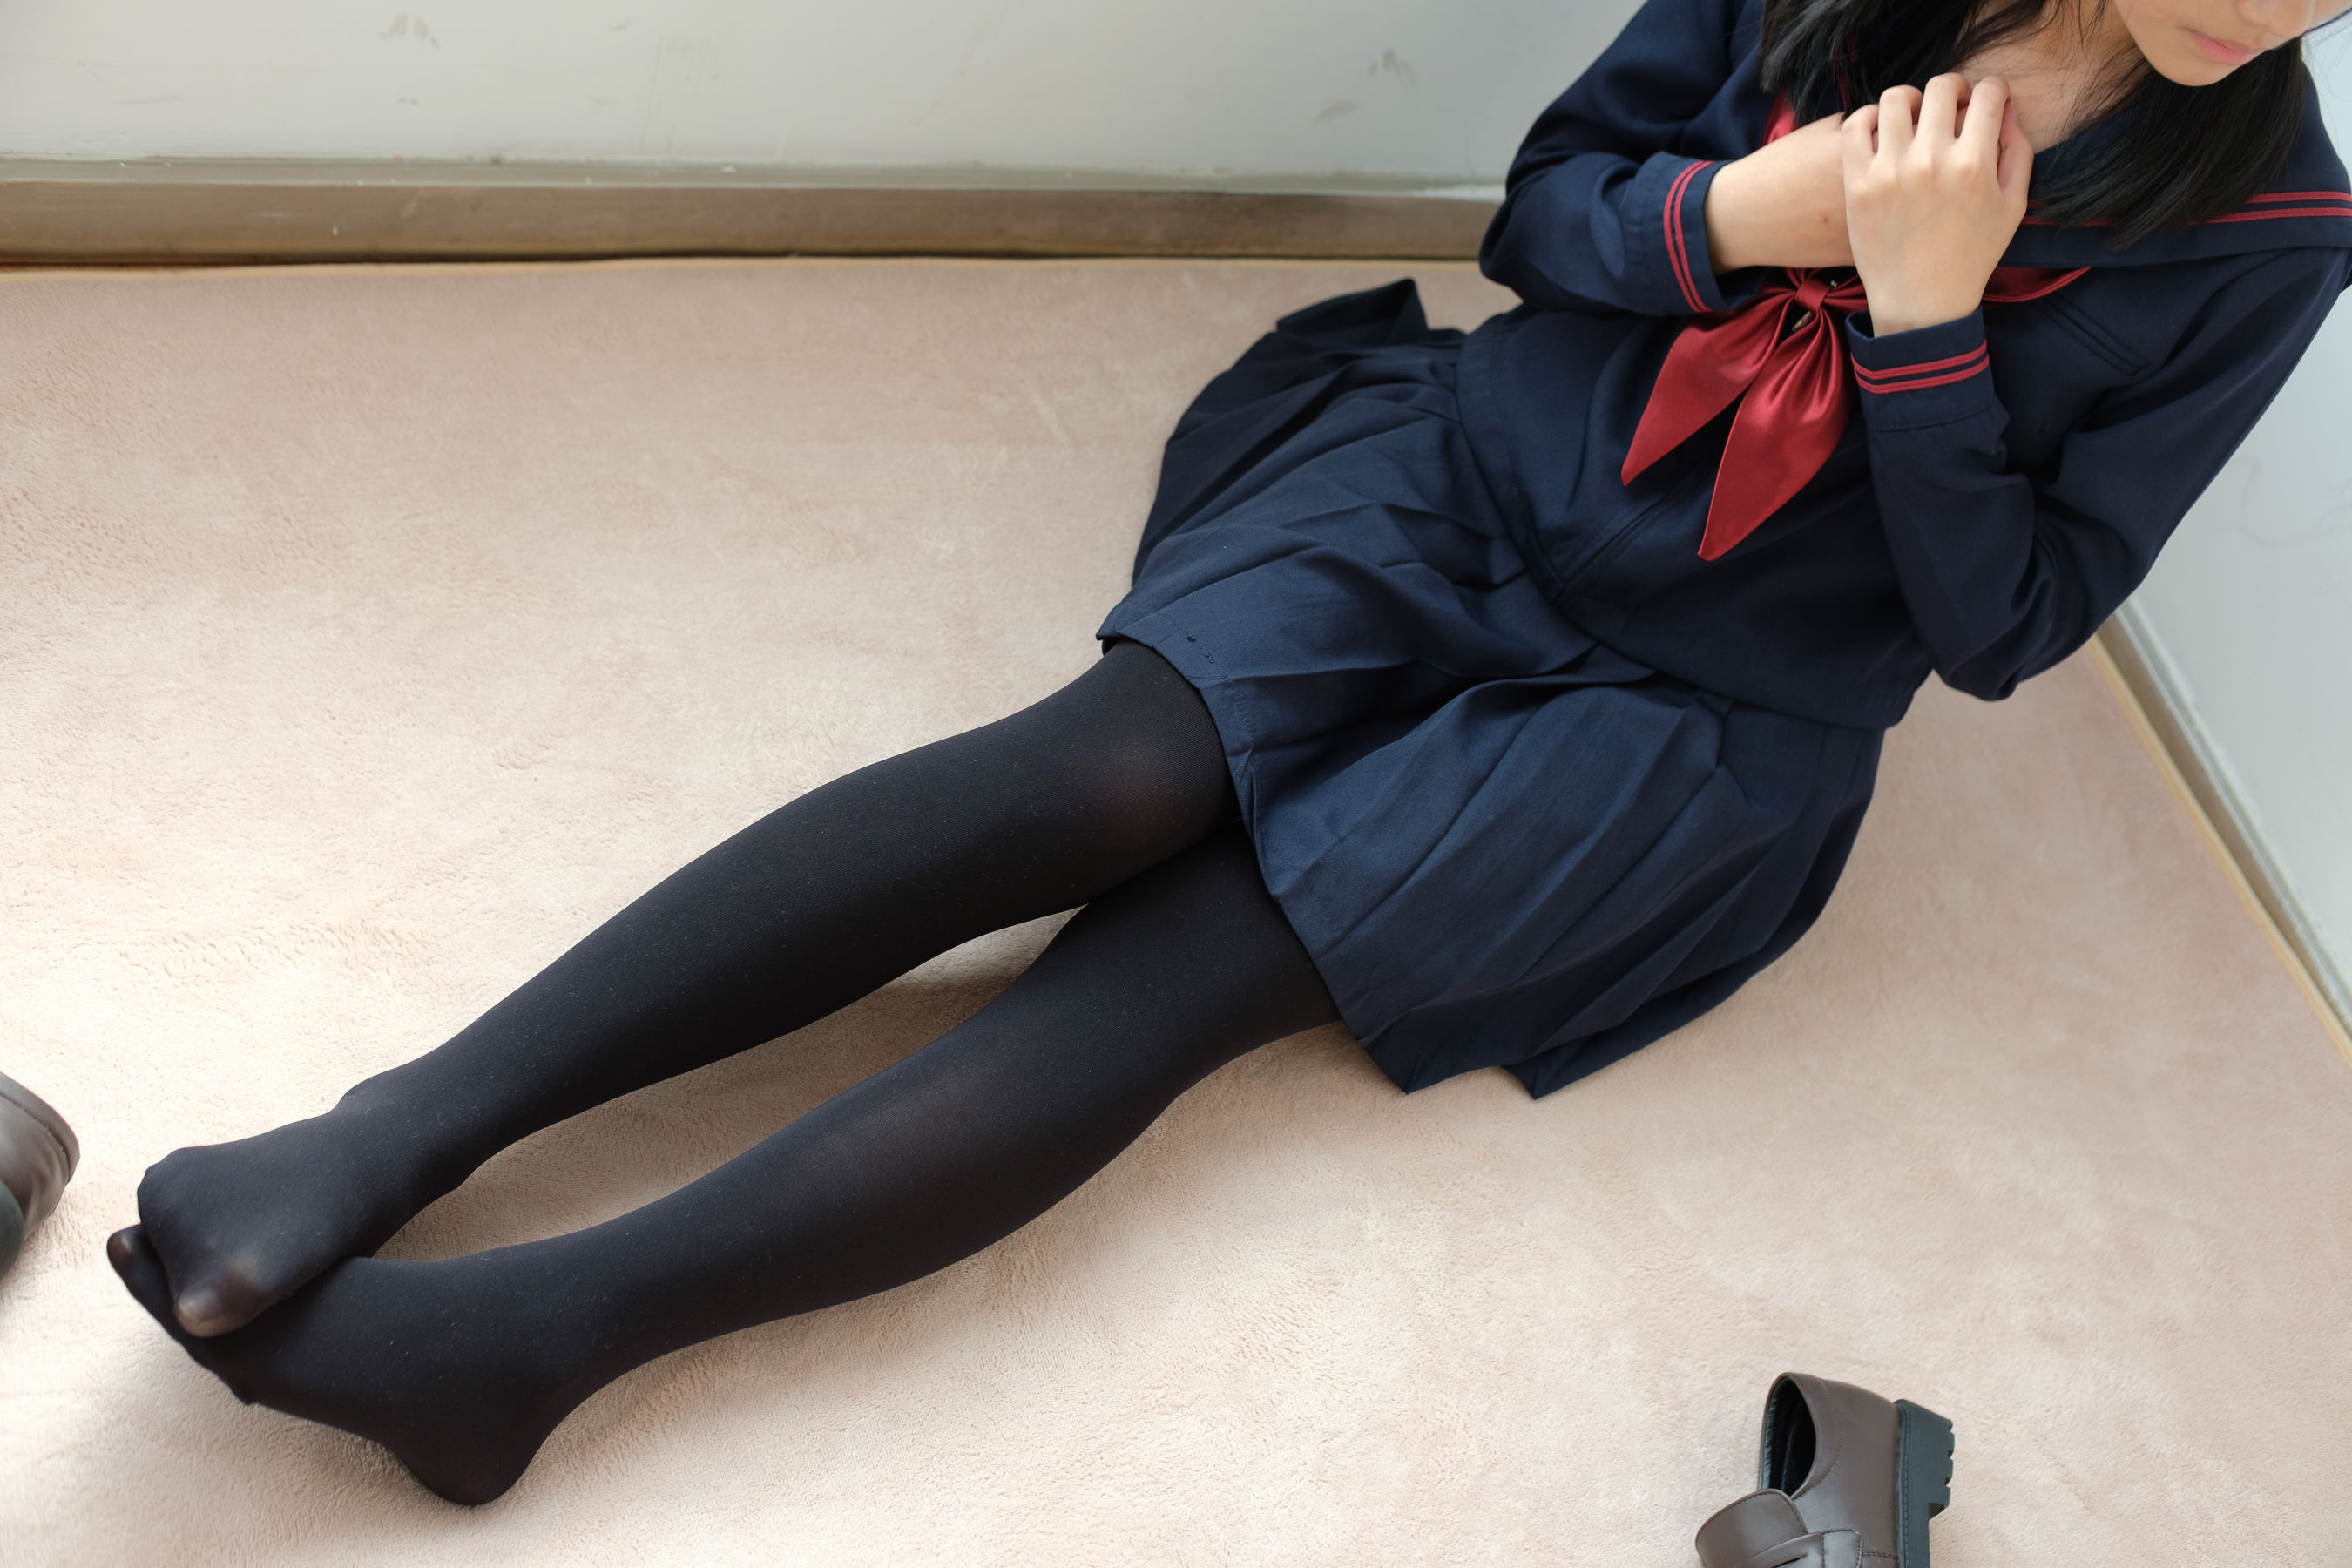 People 2700x1800 pantyhose school uniform Asian women pointed toes